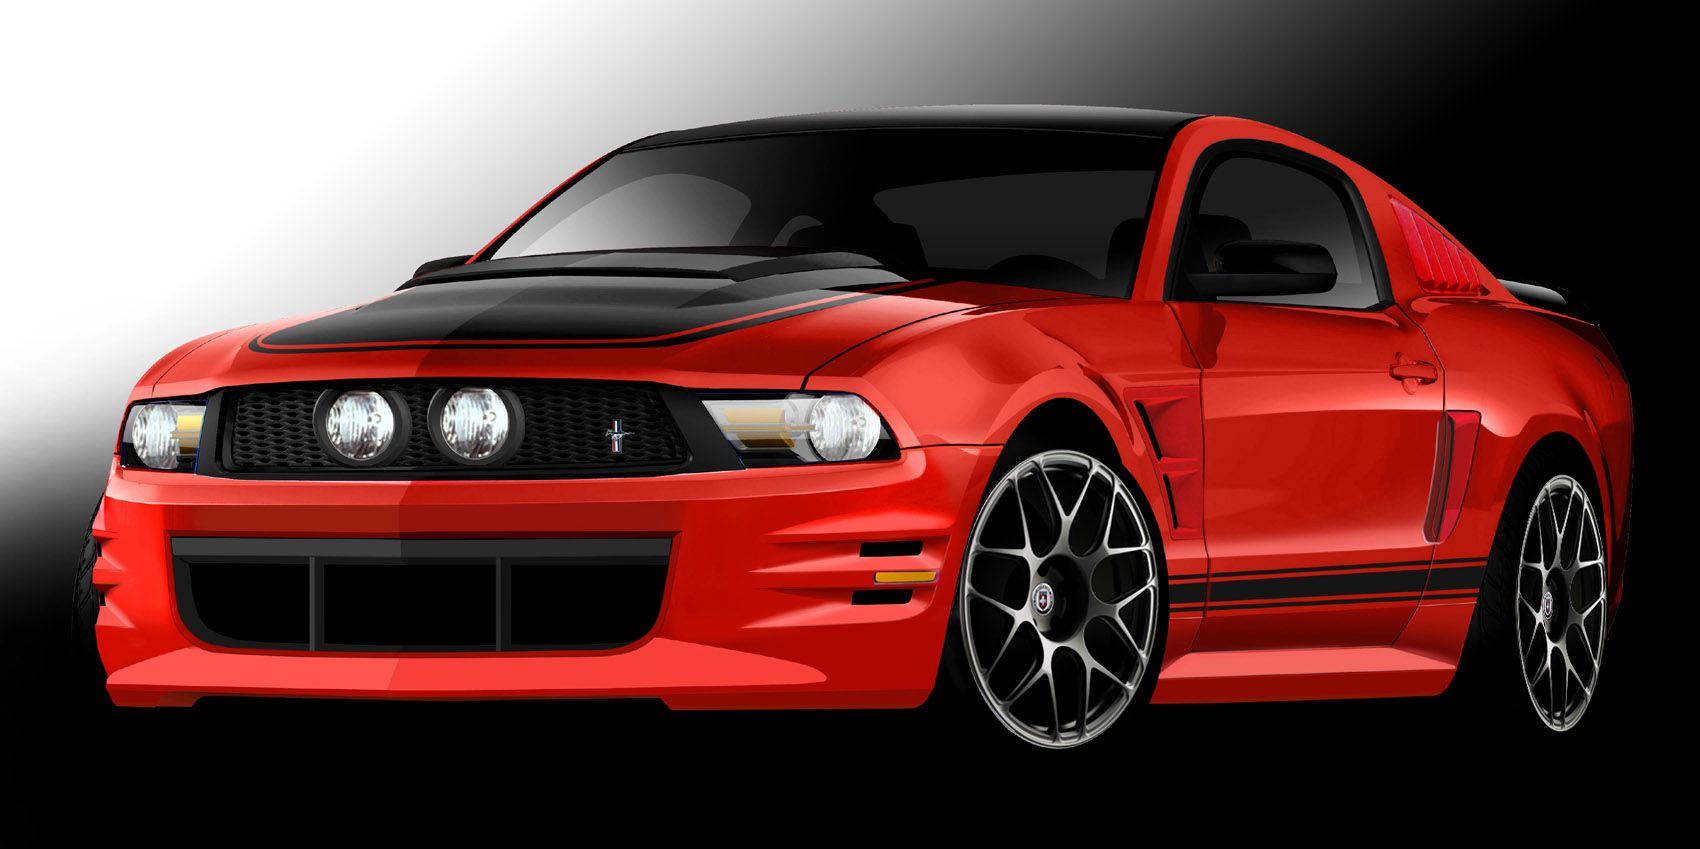 2012 Ford Mustang Boy Racer 5.0 by Creations n' Chrome